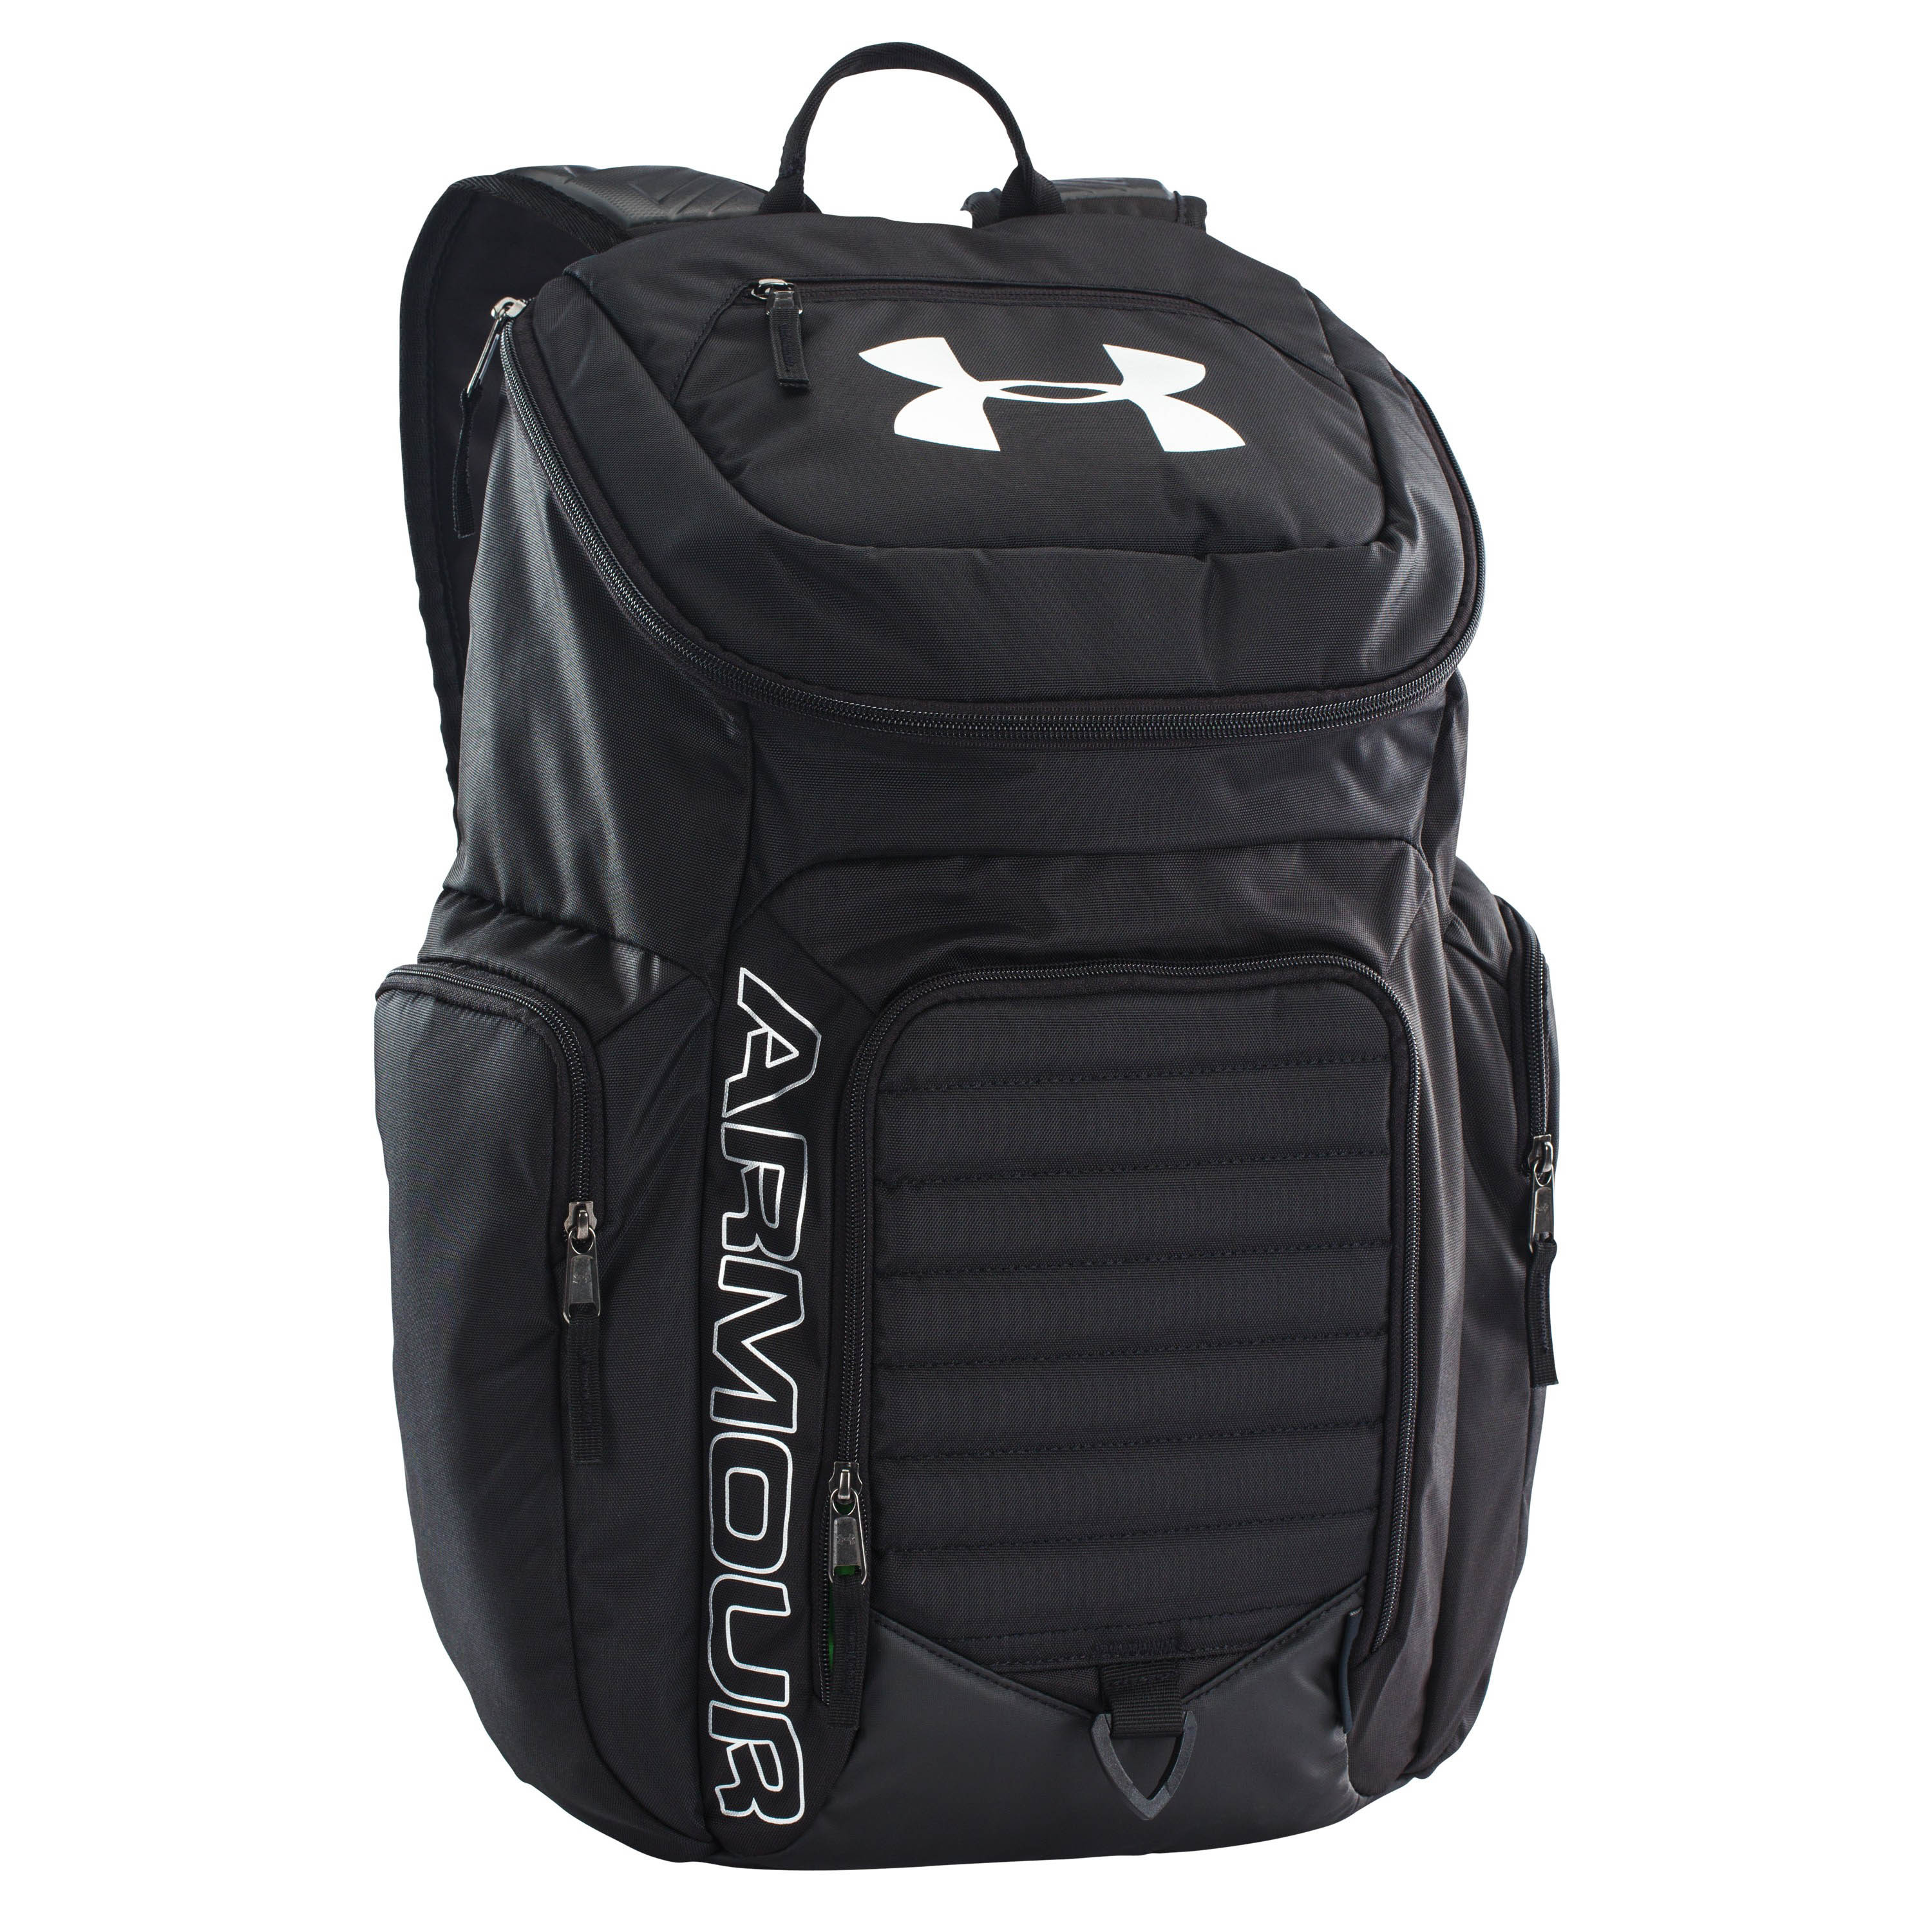 Under Armour Undeniable II Backpack 